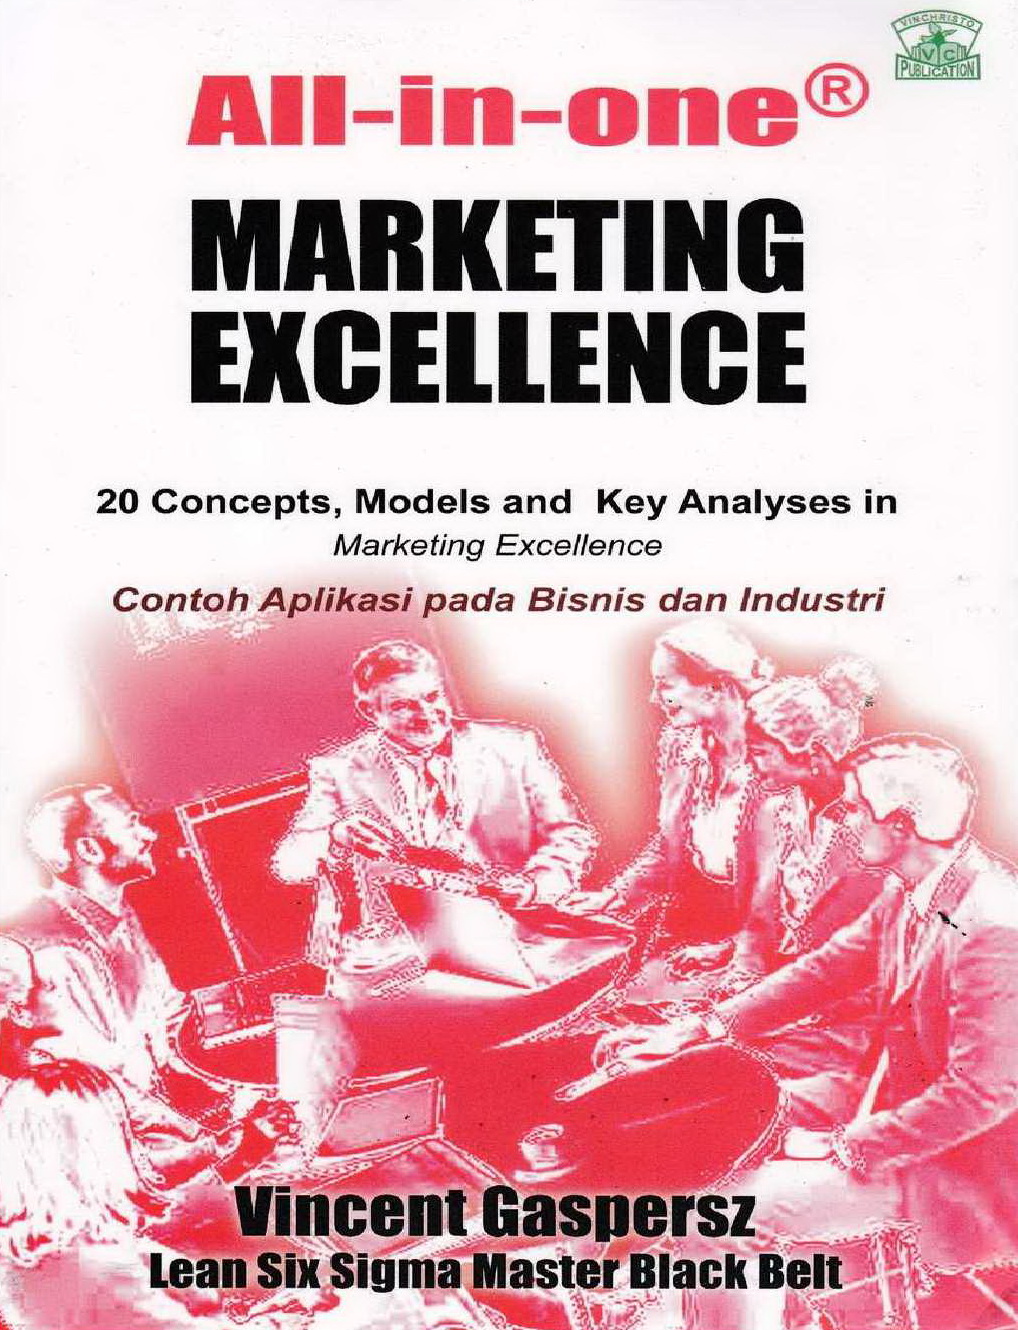 2012 All-in-one Marketing Excellence 20 Concepts, Models and Key Analyses in Marketing Excellence Contoh Aplikasi pada Bisnis dan Industri VG